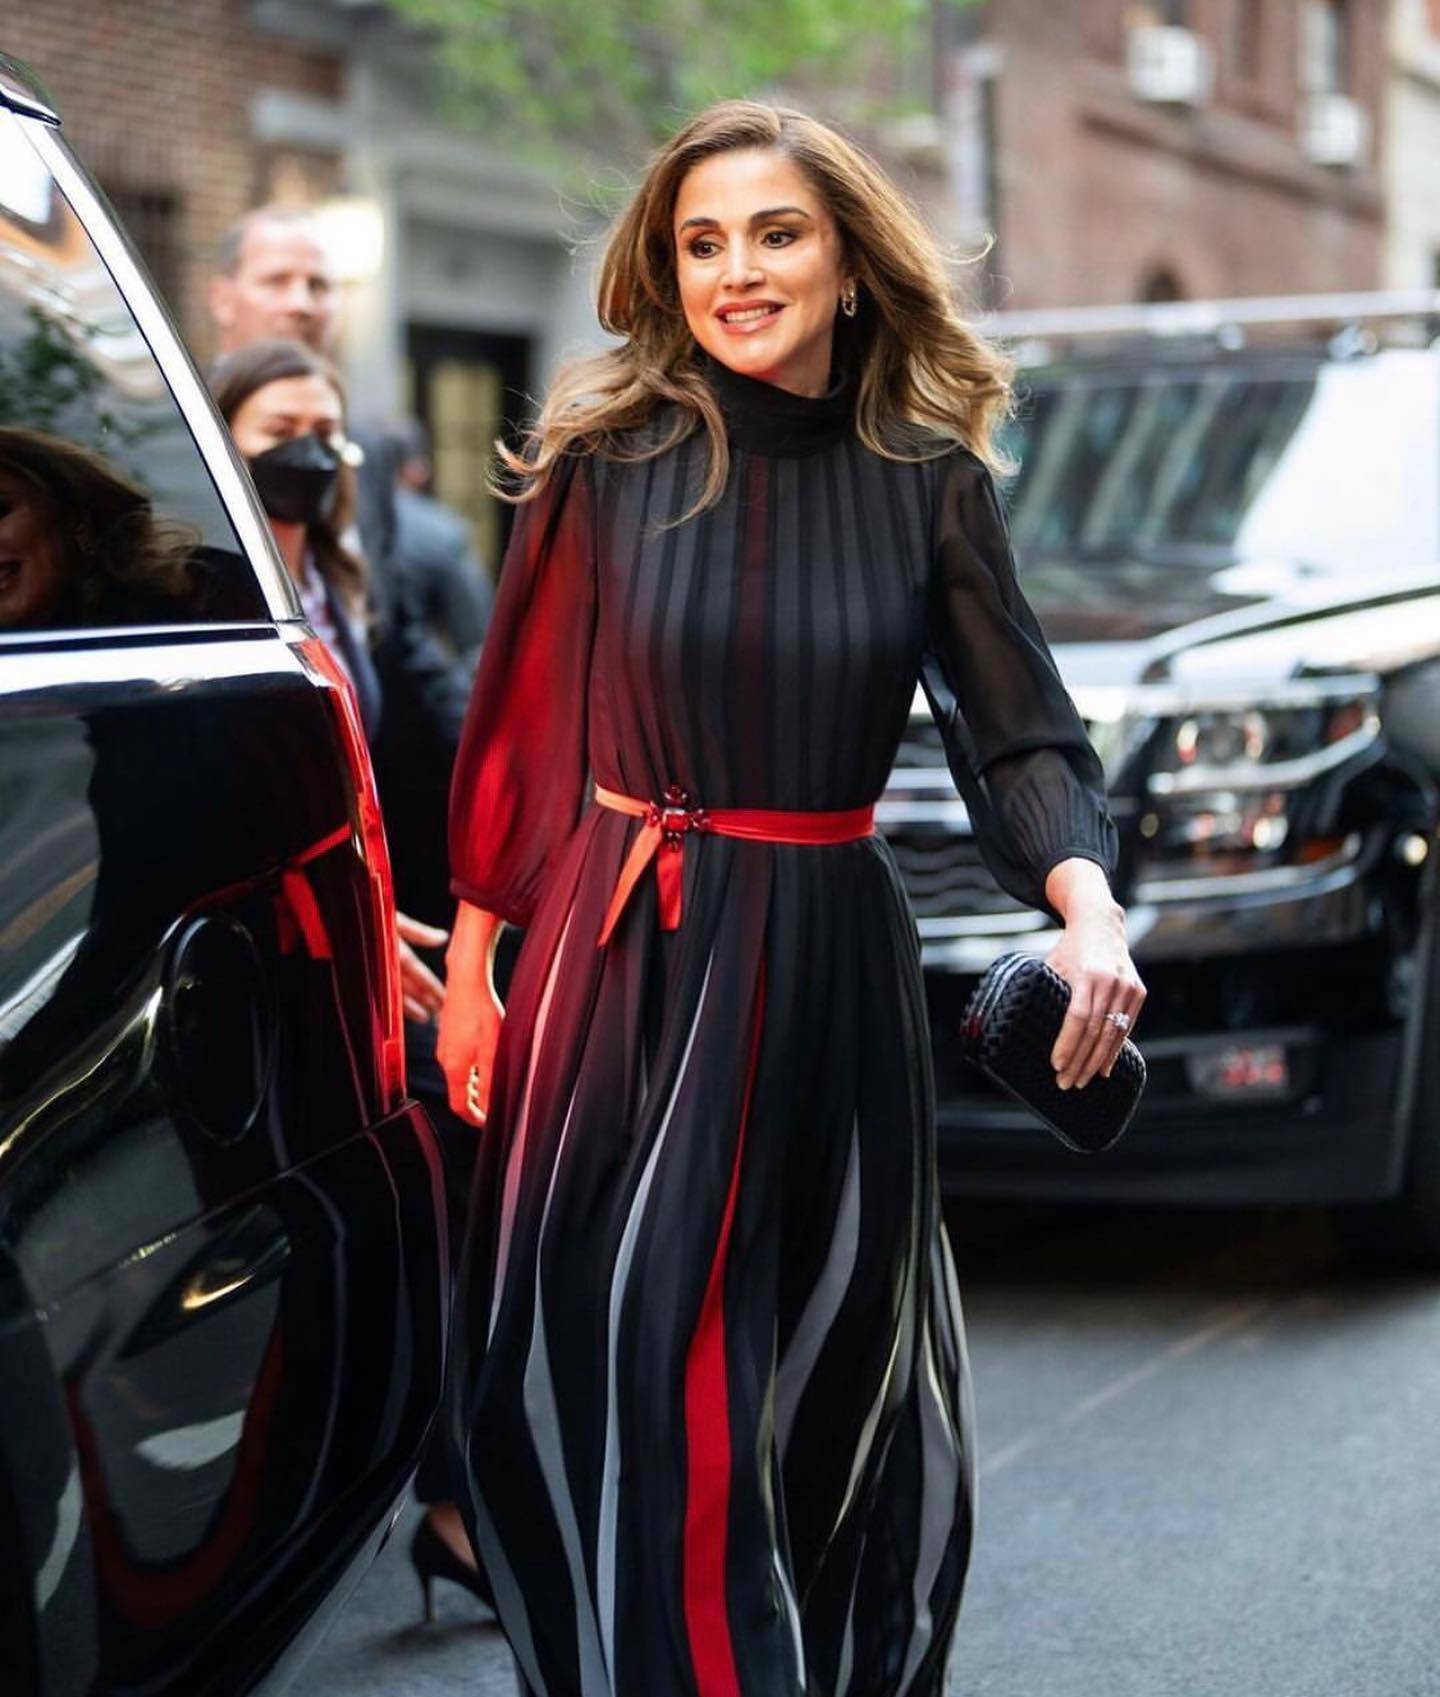 Queen Rania of Jordan wearing a dress by Daneh, one of the brands taking part in the Saudi 100 Brands show in New York. Photo: Daneh / Instagram